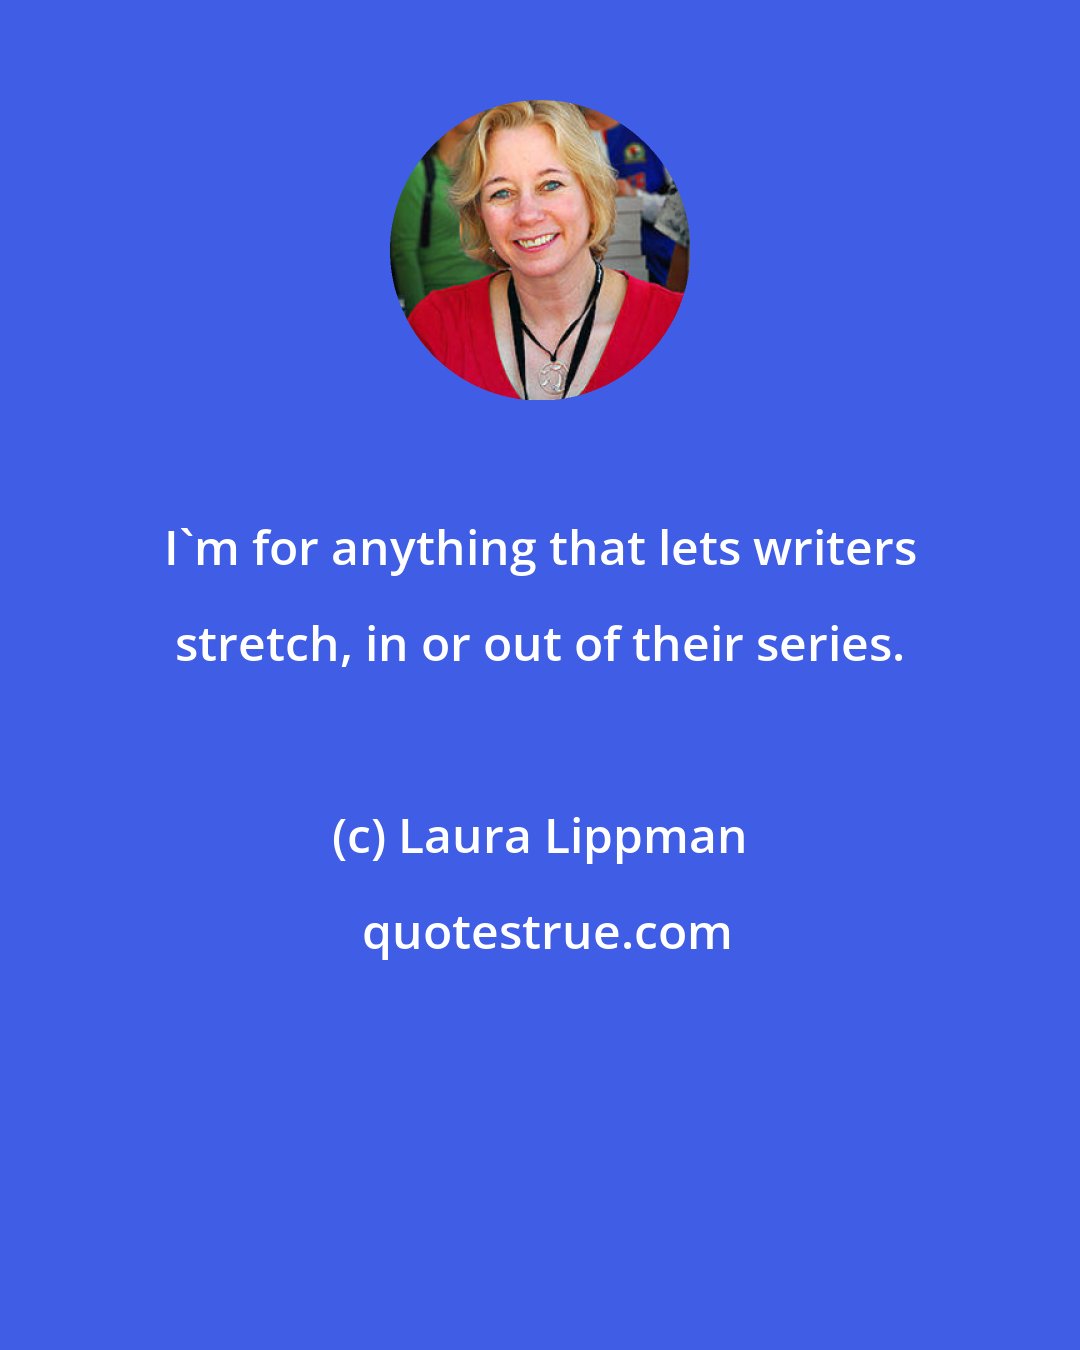 Laura Lippman: I'm for anything that lets writers stretch, in or out of their series.